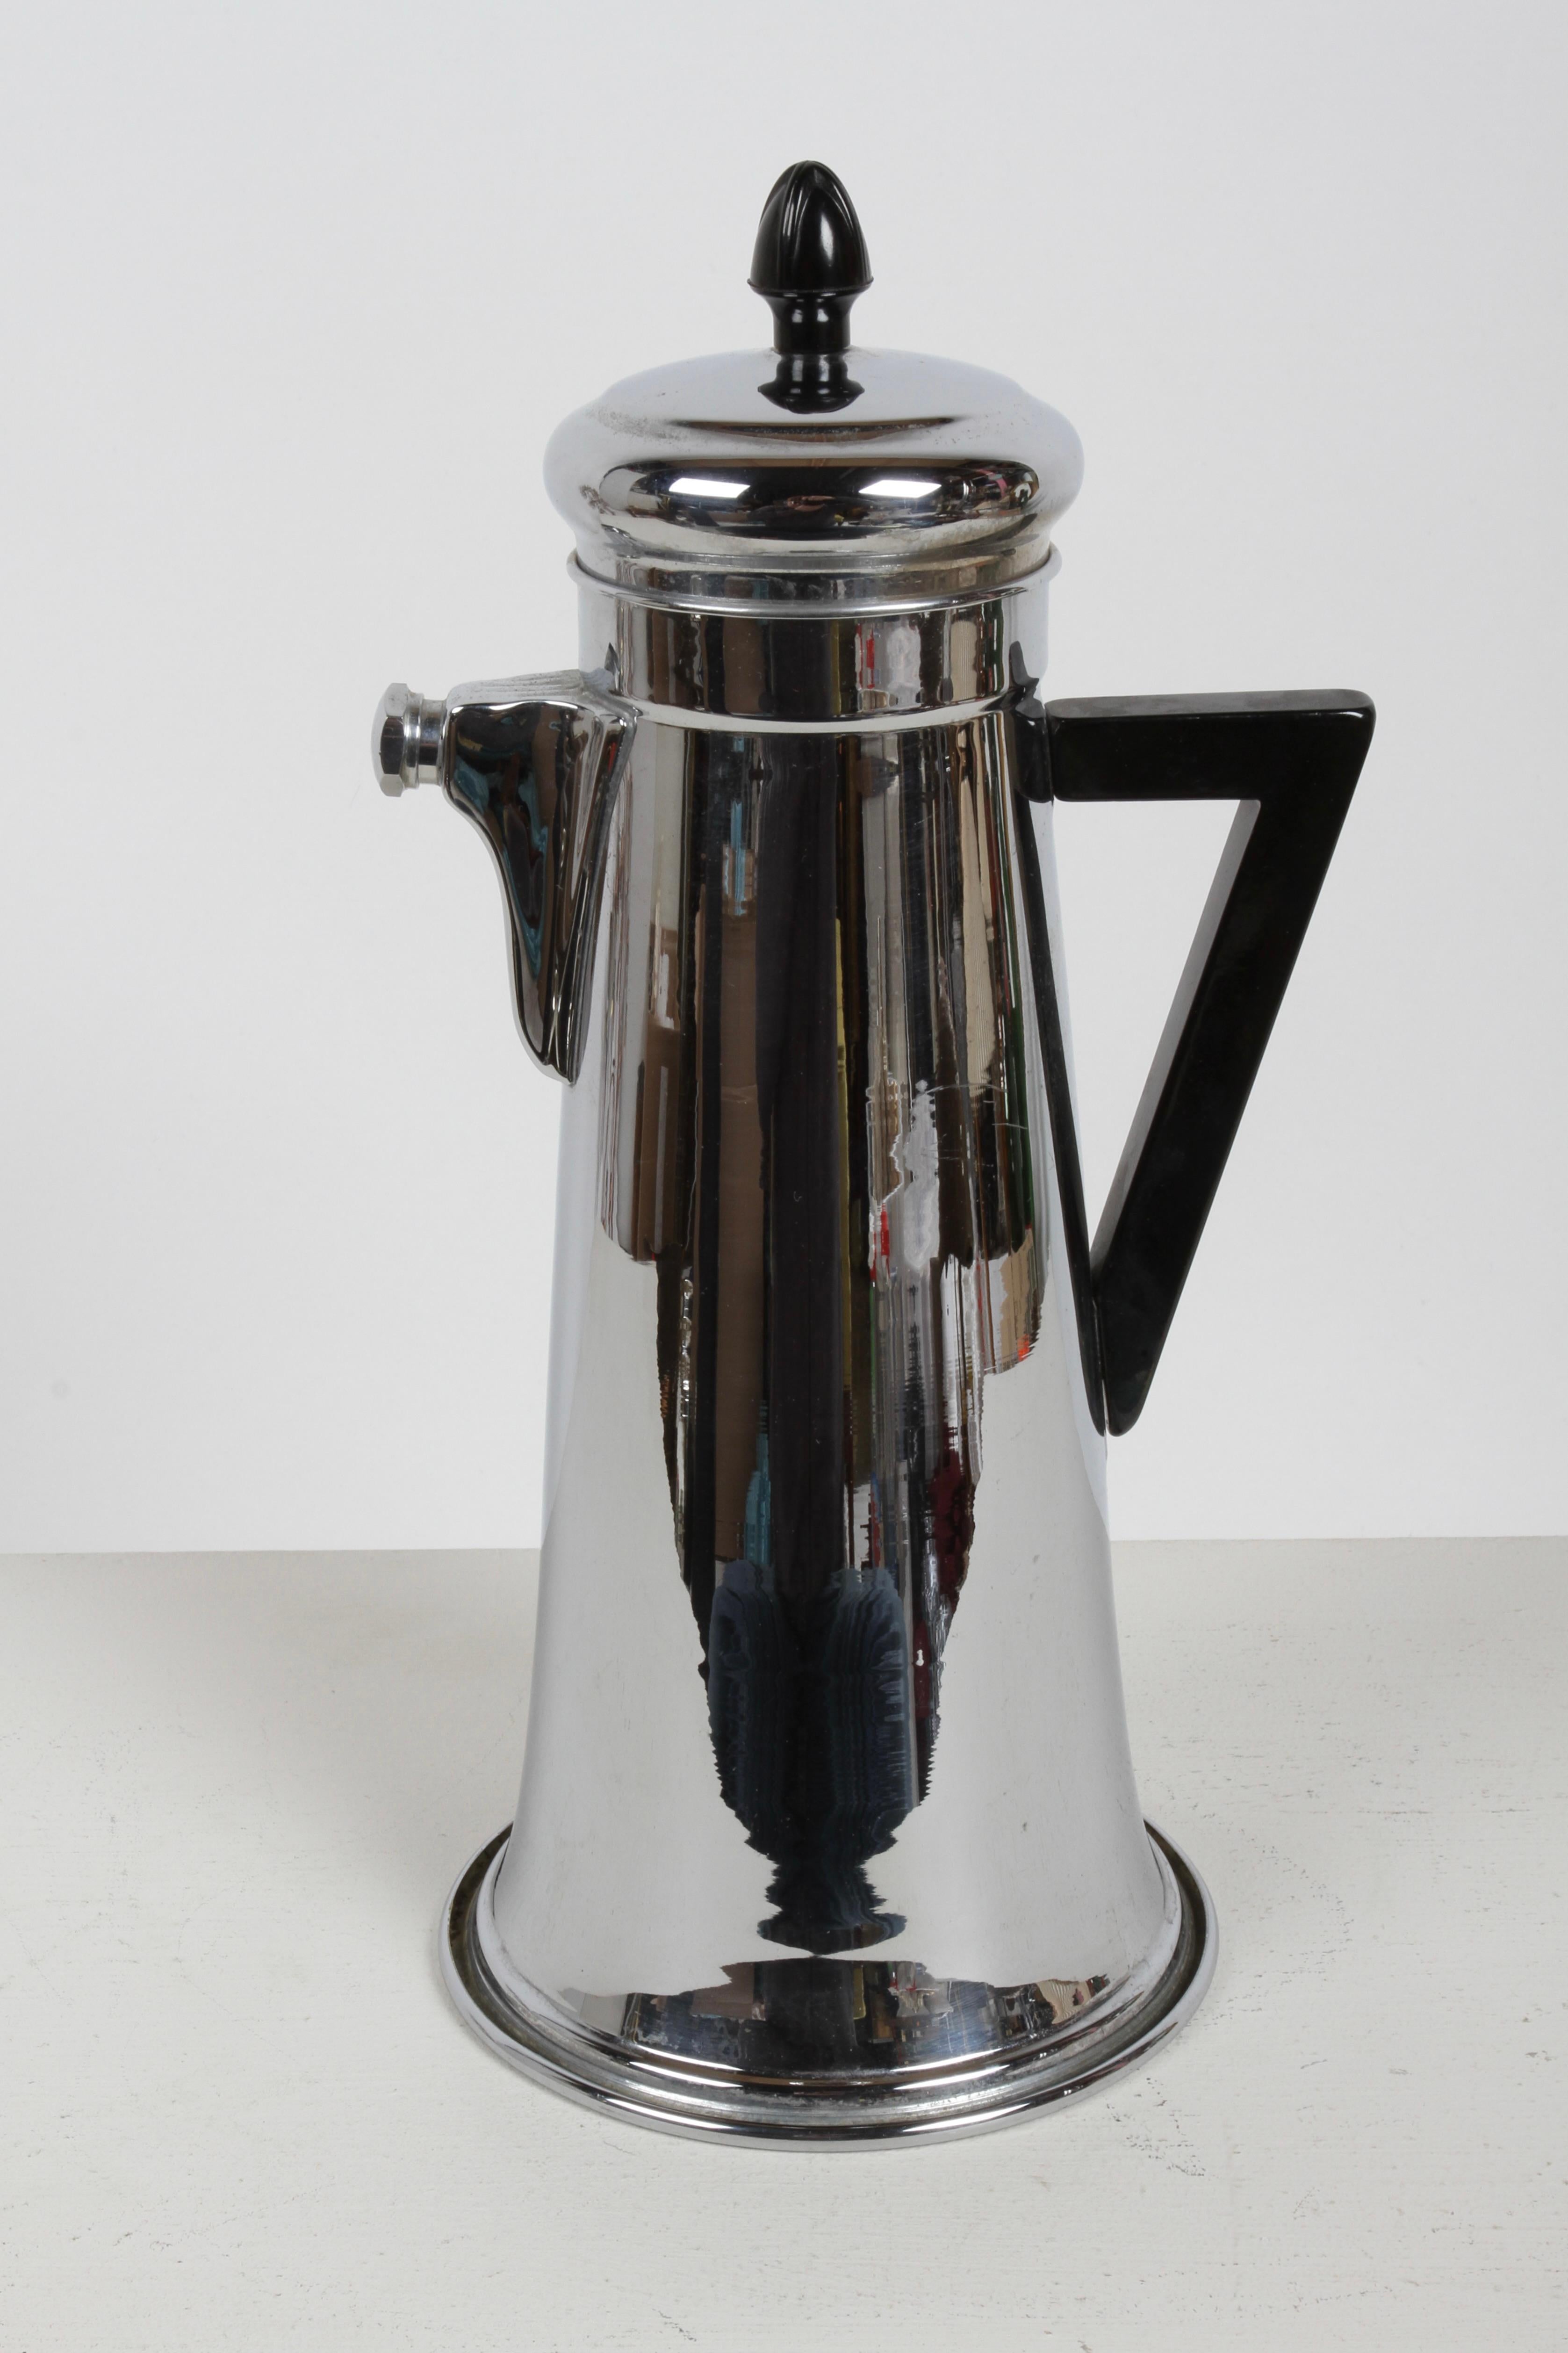  1930s vintage Art Deco Forman Brothers chrome cocktail recipe shaker,  with angular black handle & finial, possibly bakelite. Hidden on the bottom of this shaker are 14 cocktail recipes. This patented Art Deco design features a strainer built into